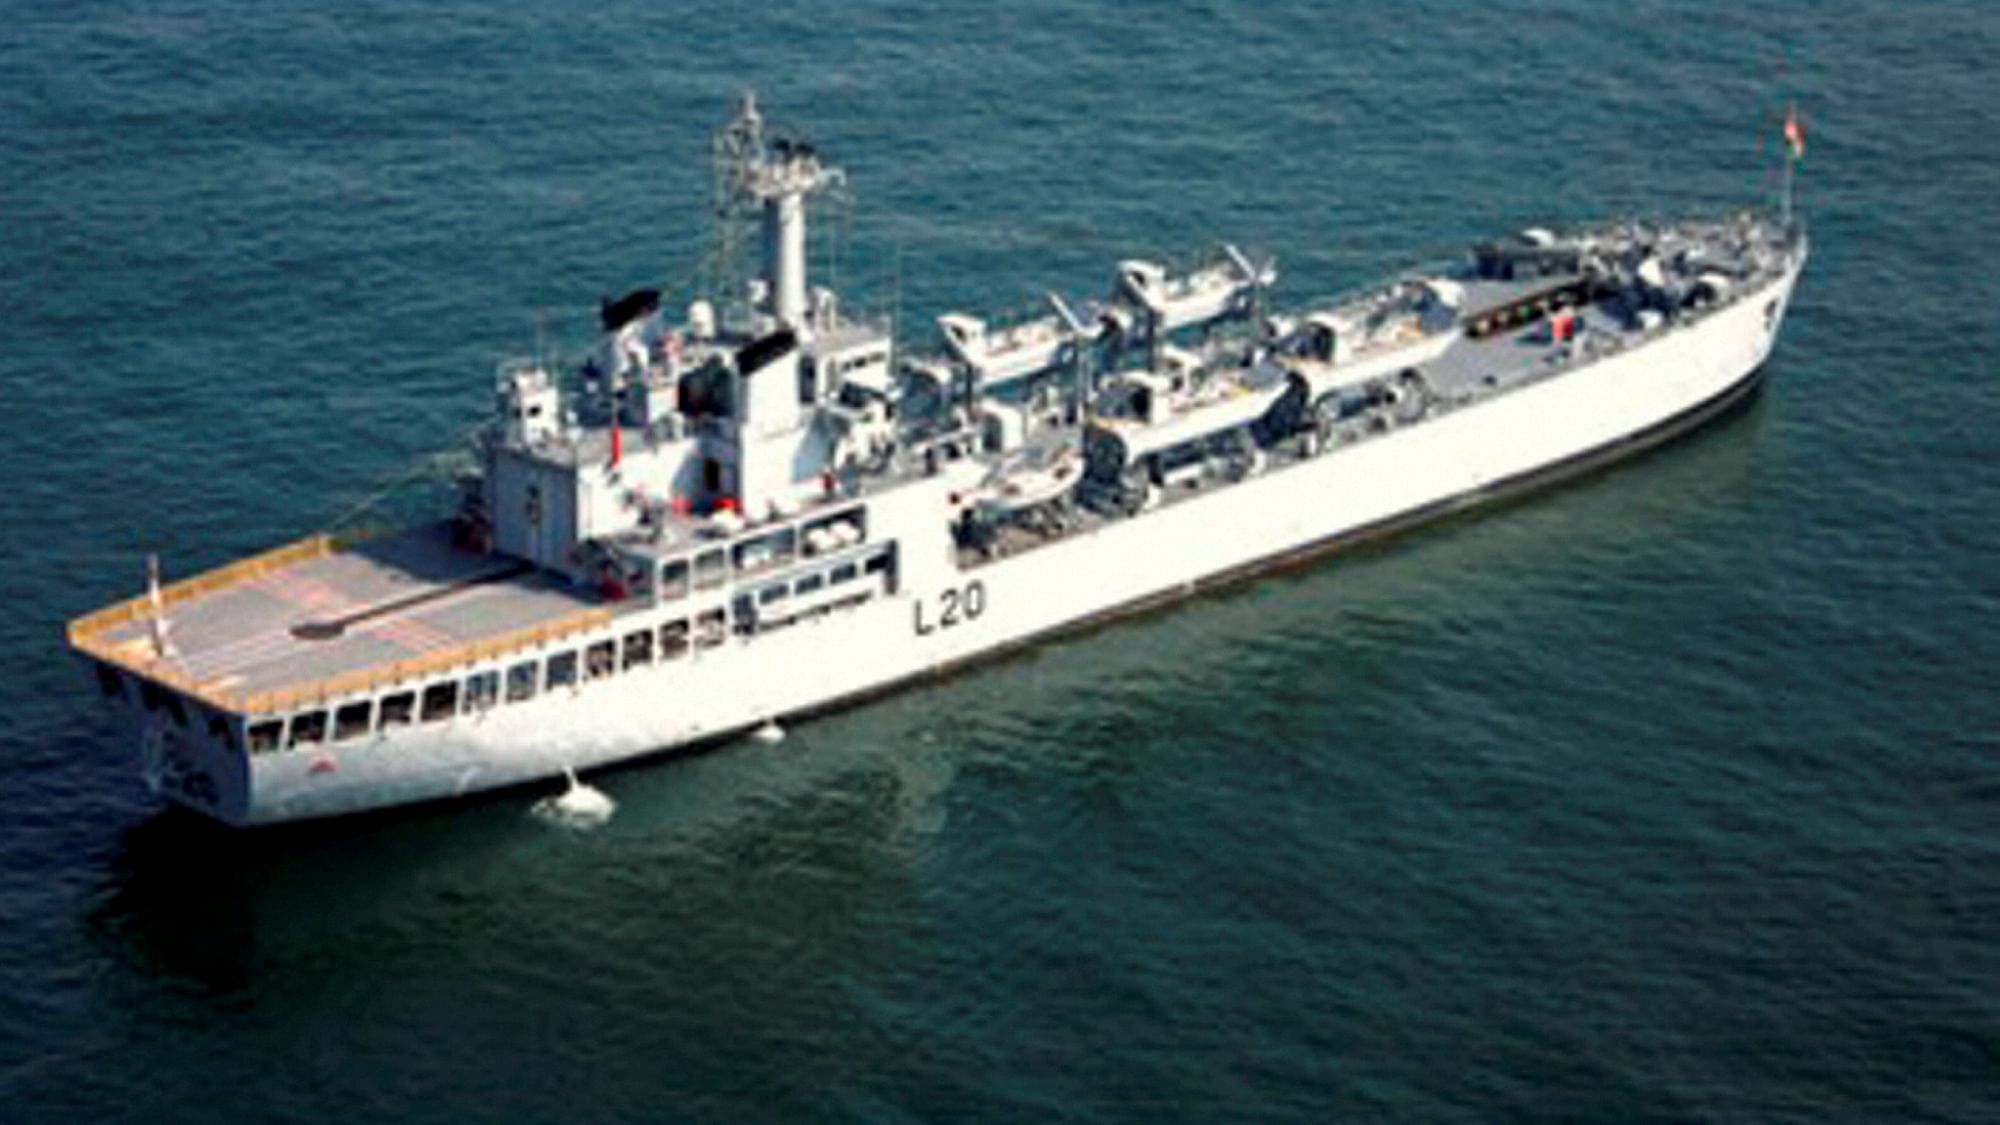 Indian Navy has launched Operation Samudra Setu as part of the national effort to repatriate Indian citizens from overseas. Indian Naval Ships Jalashwa and Magar are presently enroute to the port of Male, Republic of Maldives to commence evacuation operations.